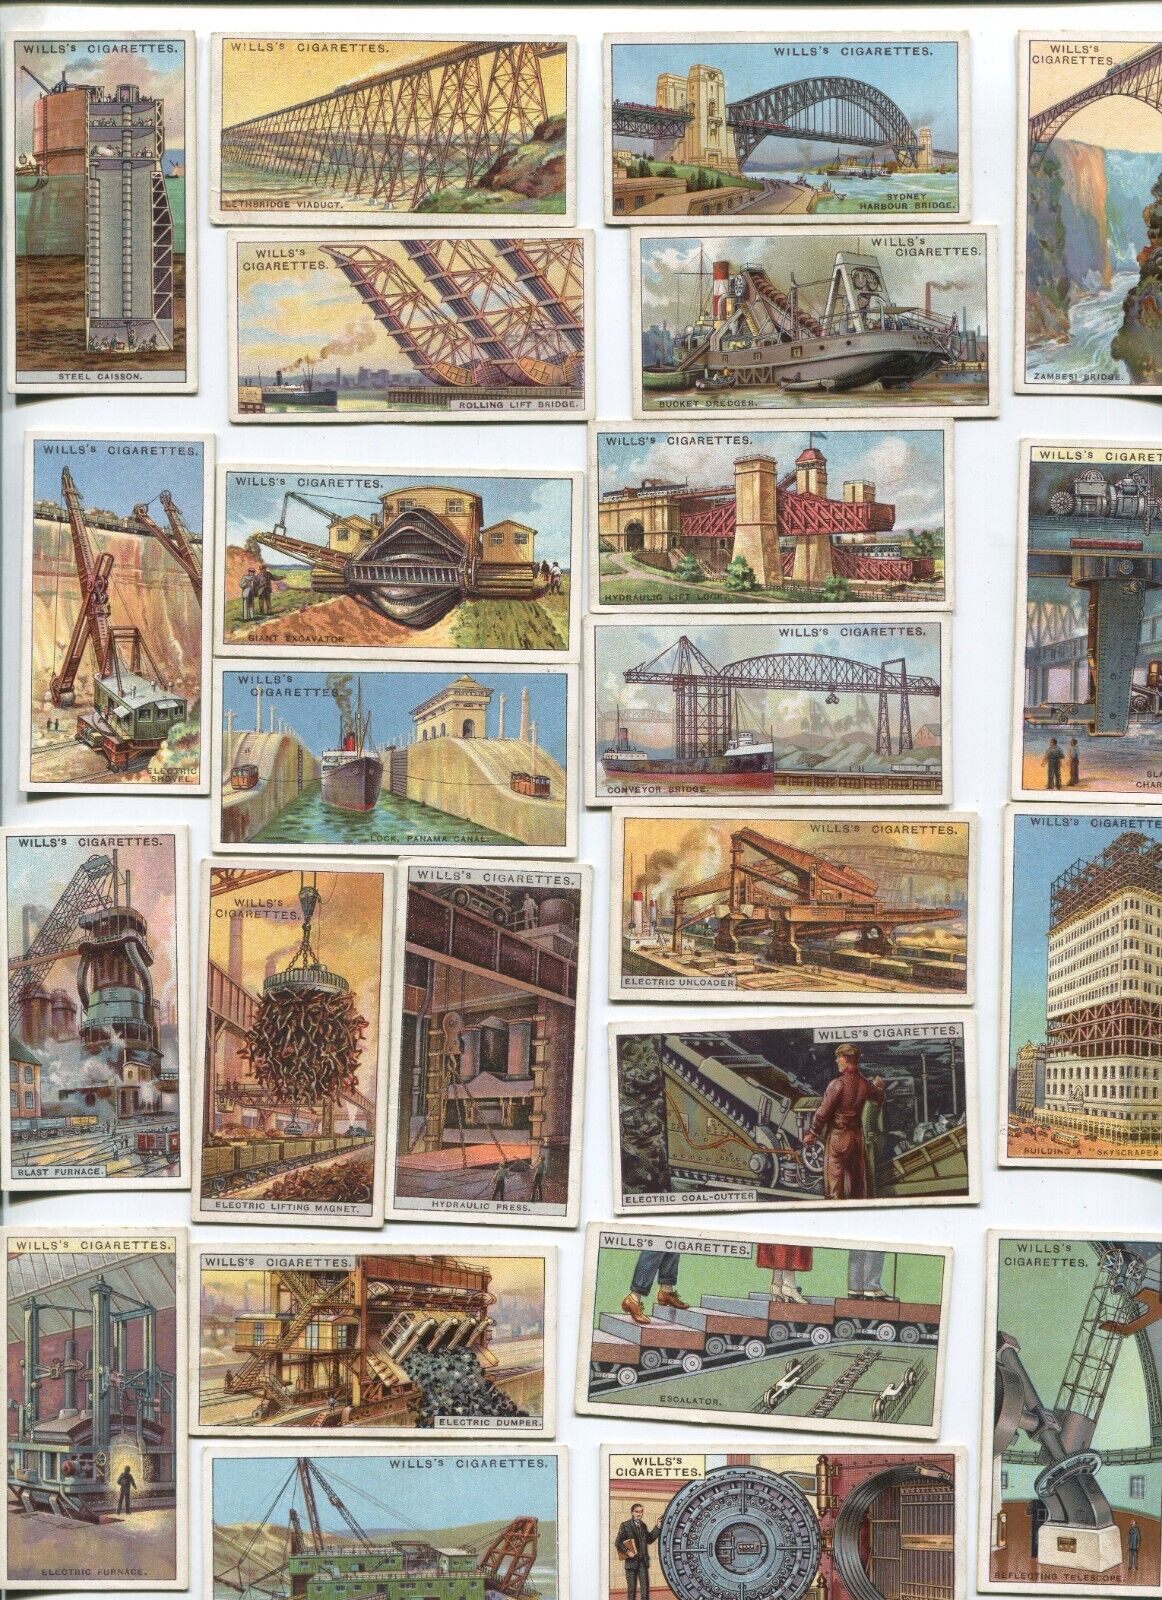 1927 W.D. & H.O. WILLS CIGARETTES ENGINEERING WONDERS 50 CARD COMPLETE SET